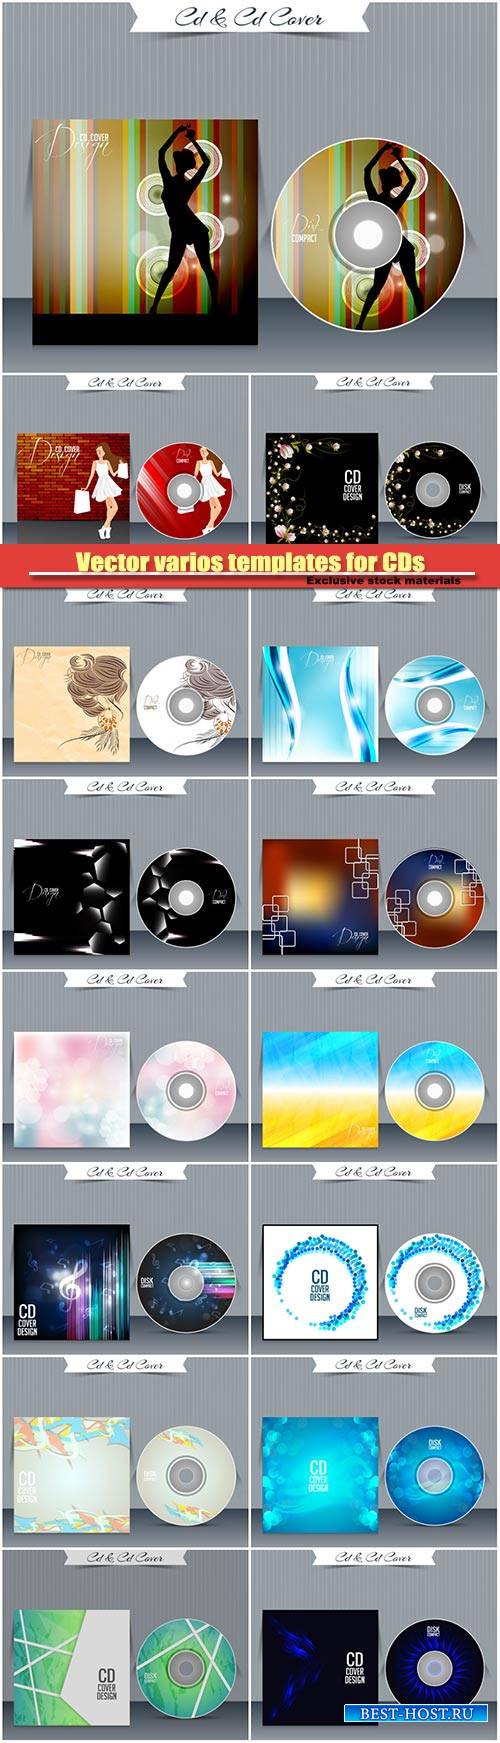 Vector various templates for CDs